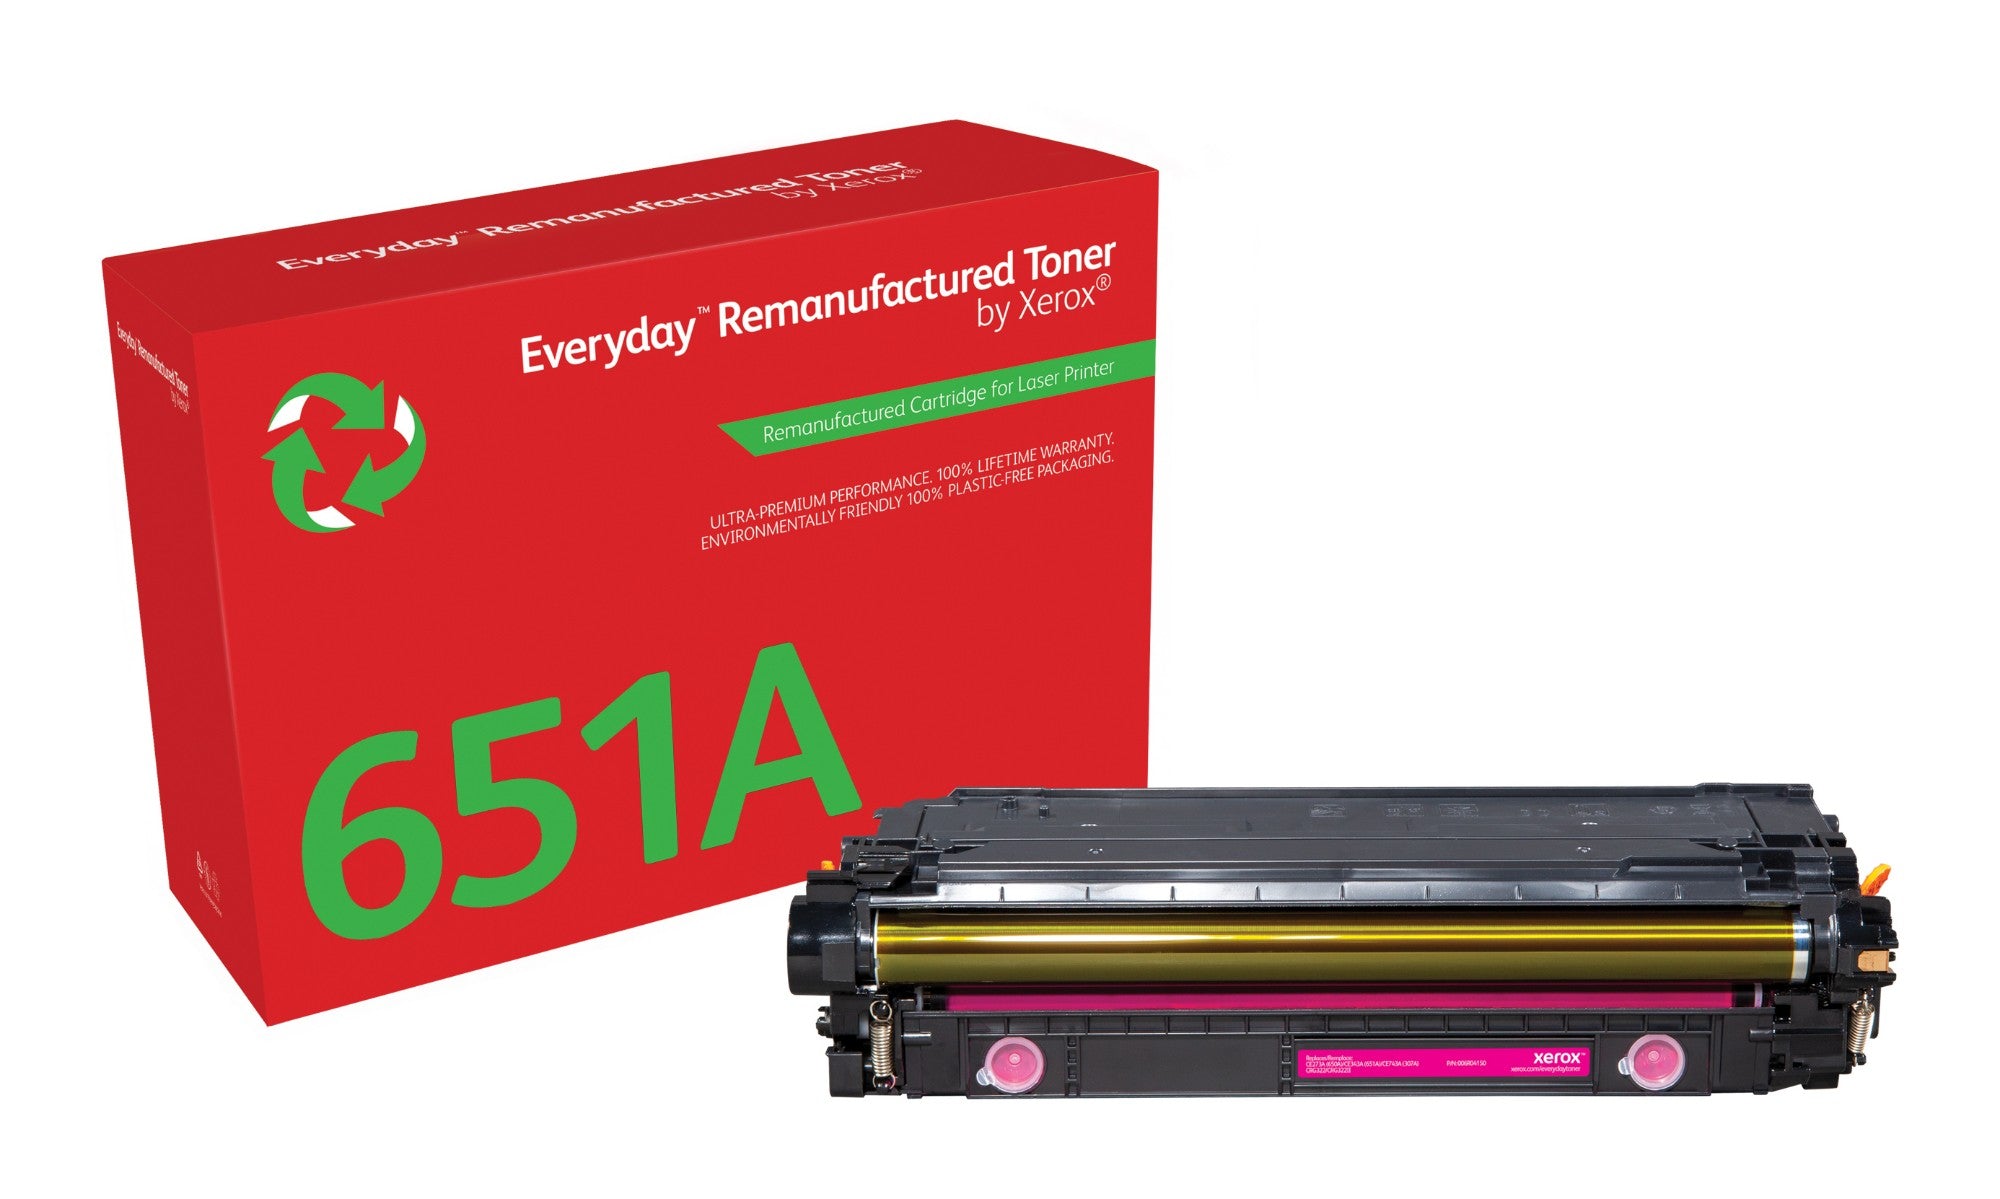 Everyday™ Magenta Toner by Xerox compatible with HP 651A/ 650A/ 307A (CE343A/CE273A/CE743A)